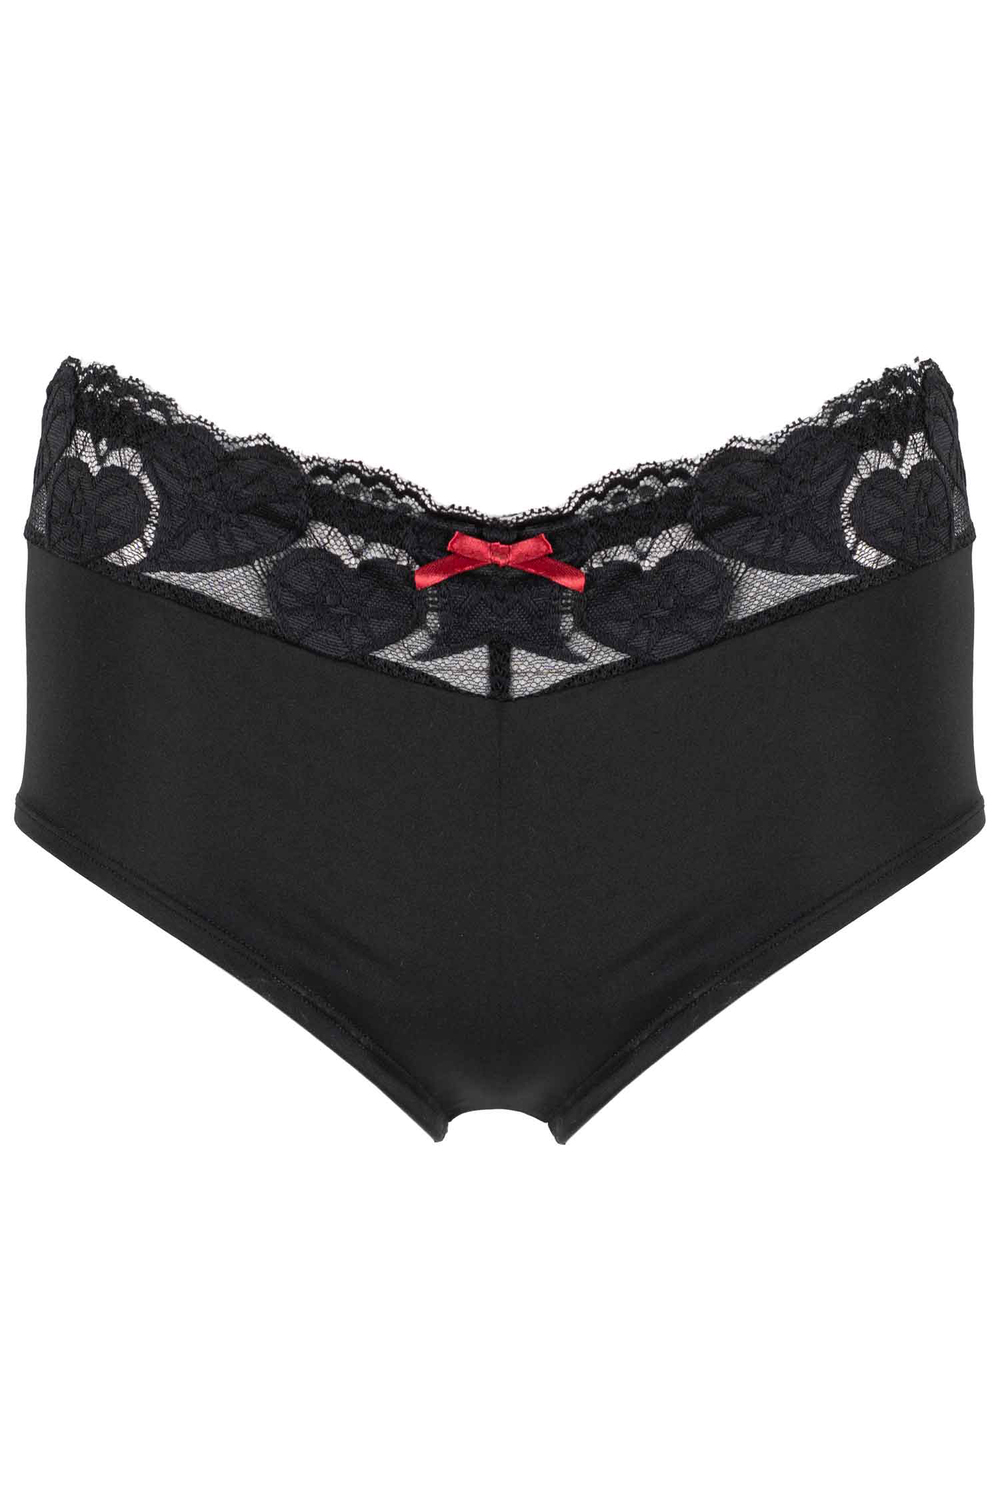 LACE HARNESS THONG UNDERWEAR